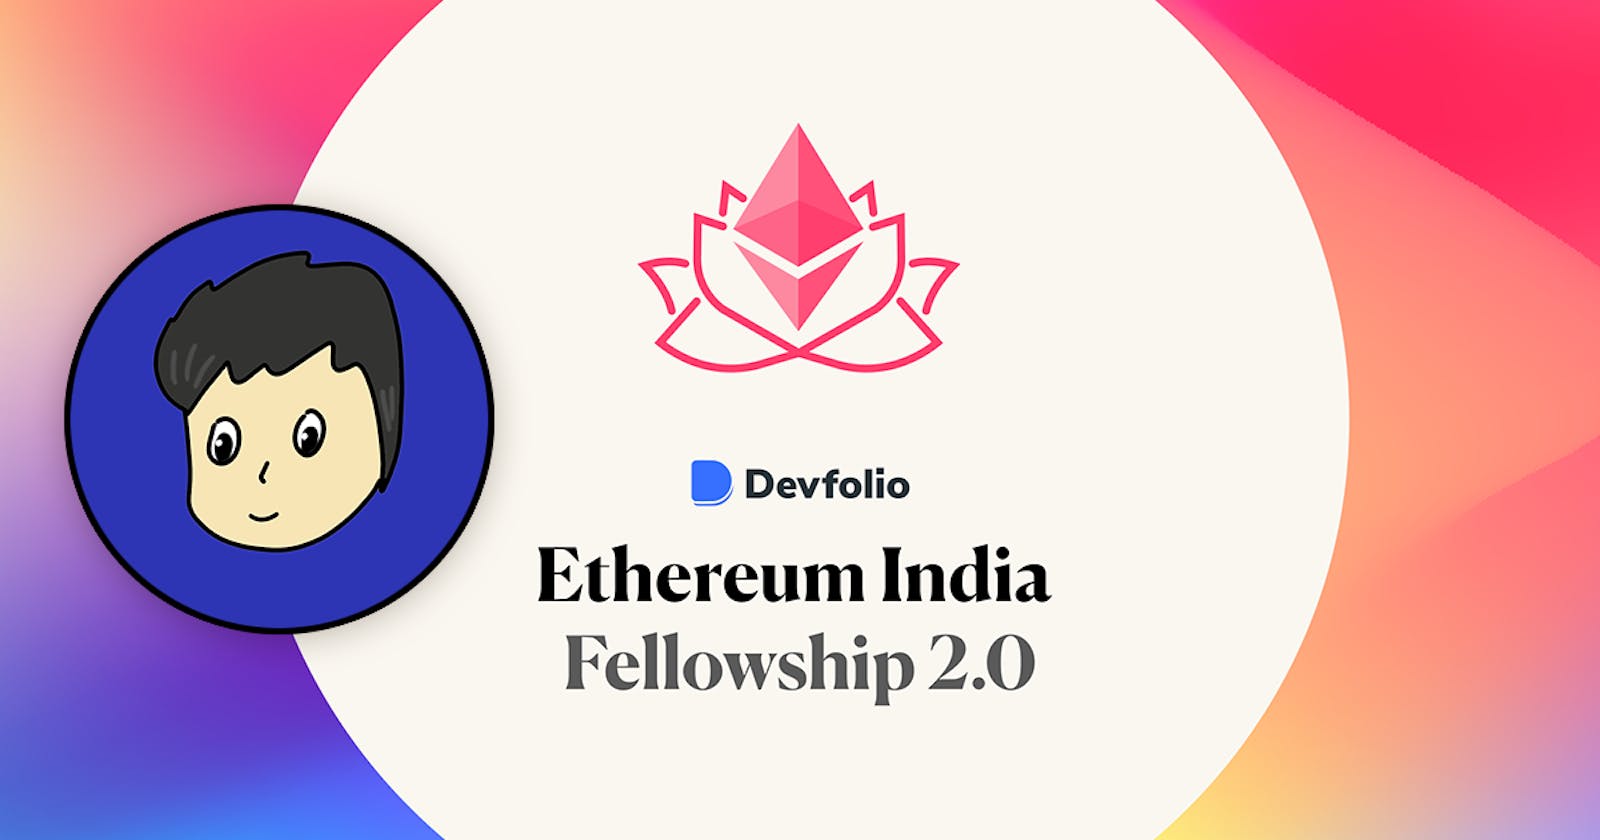 So... I was part of Ethereum India Fellowship 2.0